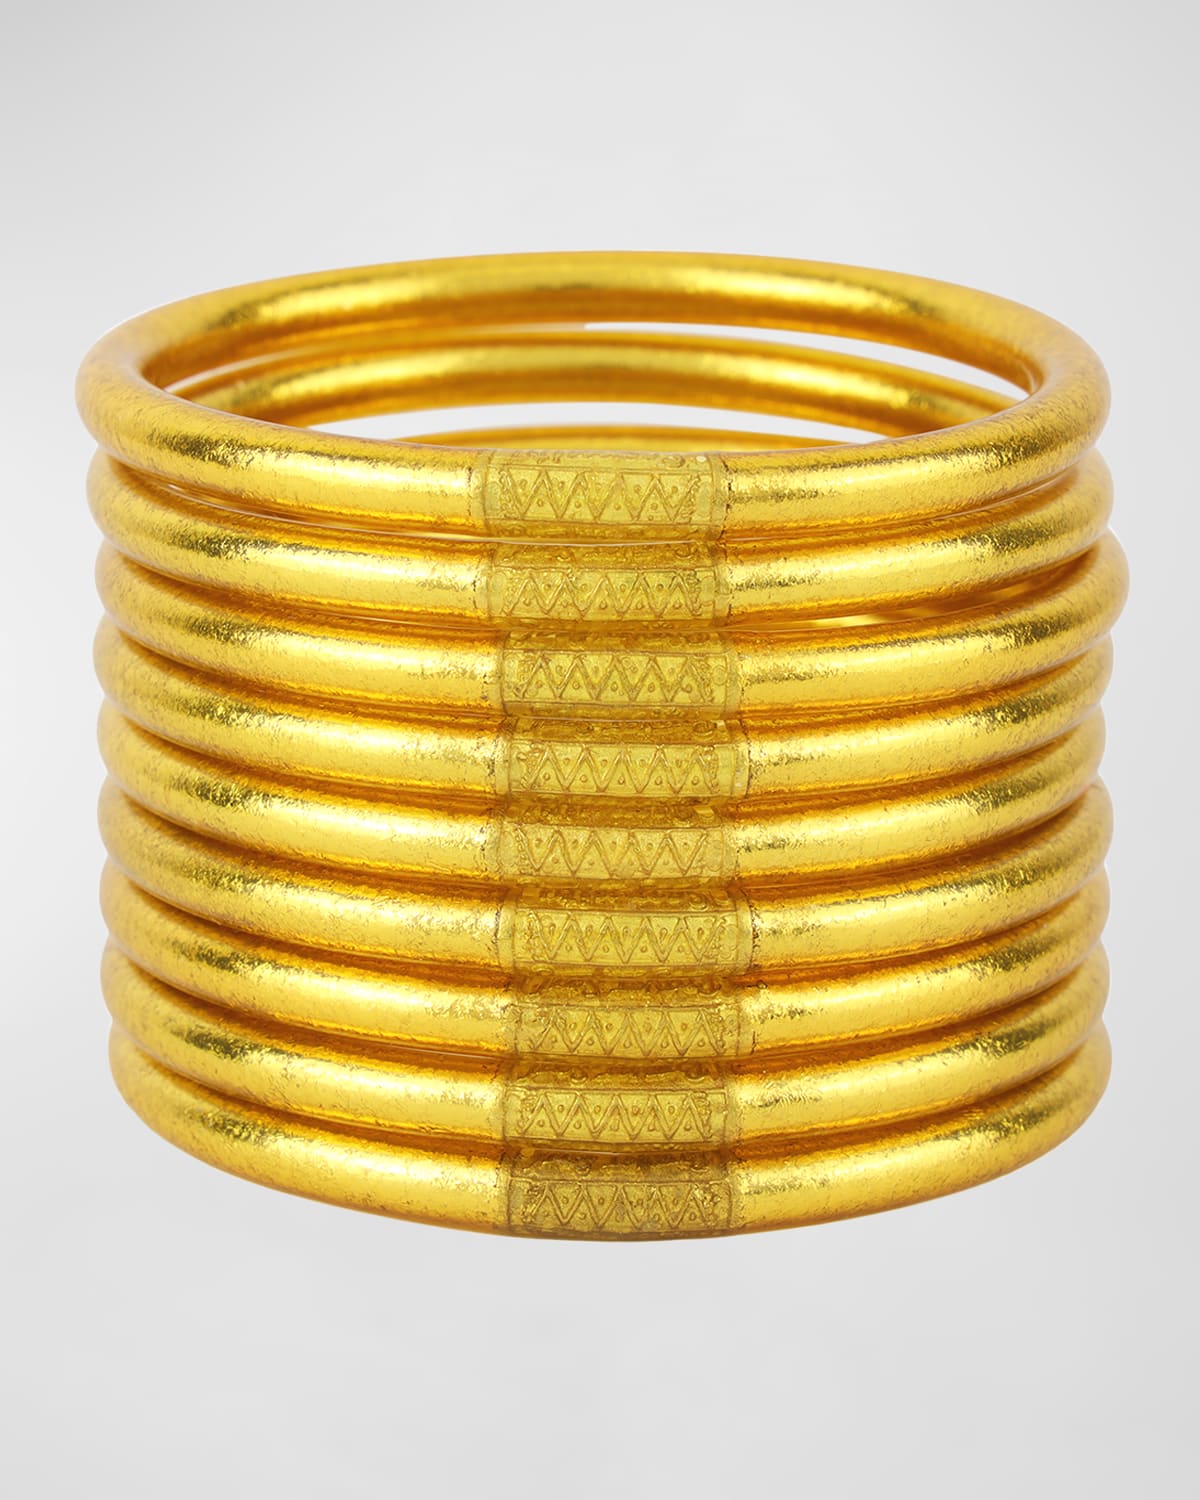 Gold All-Weather Bangles, Size S-L, Set of 9